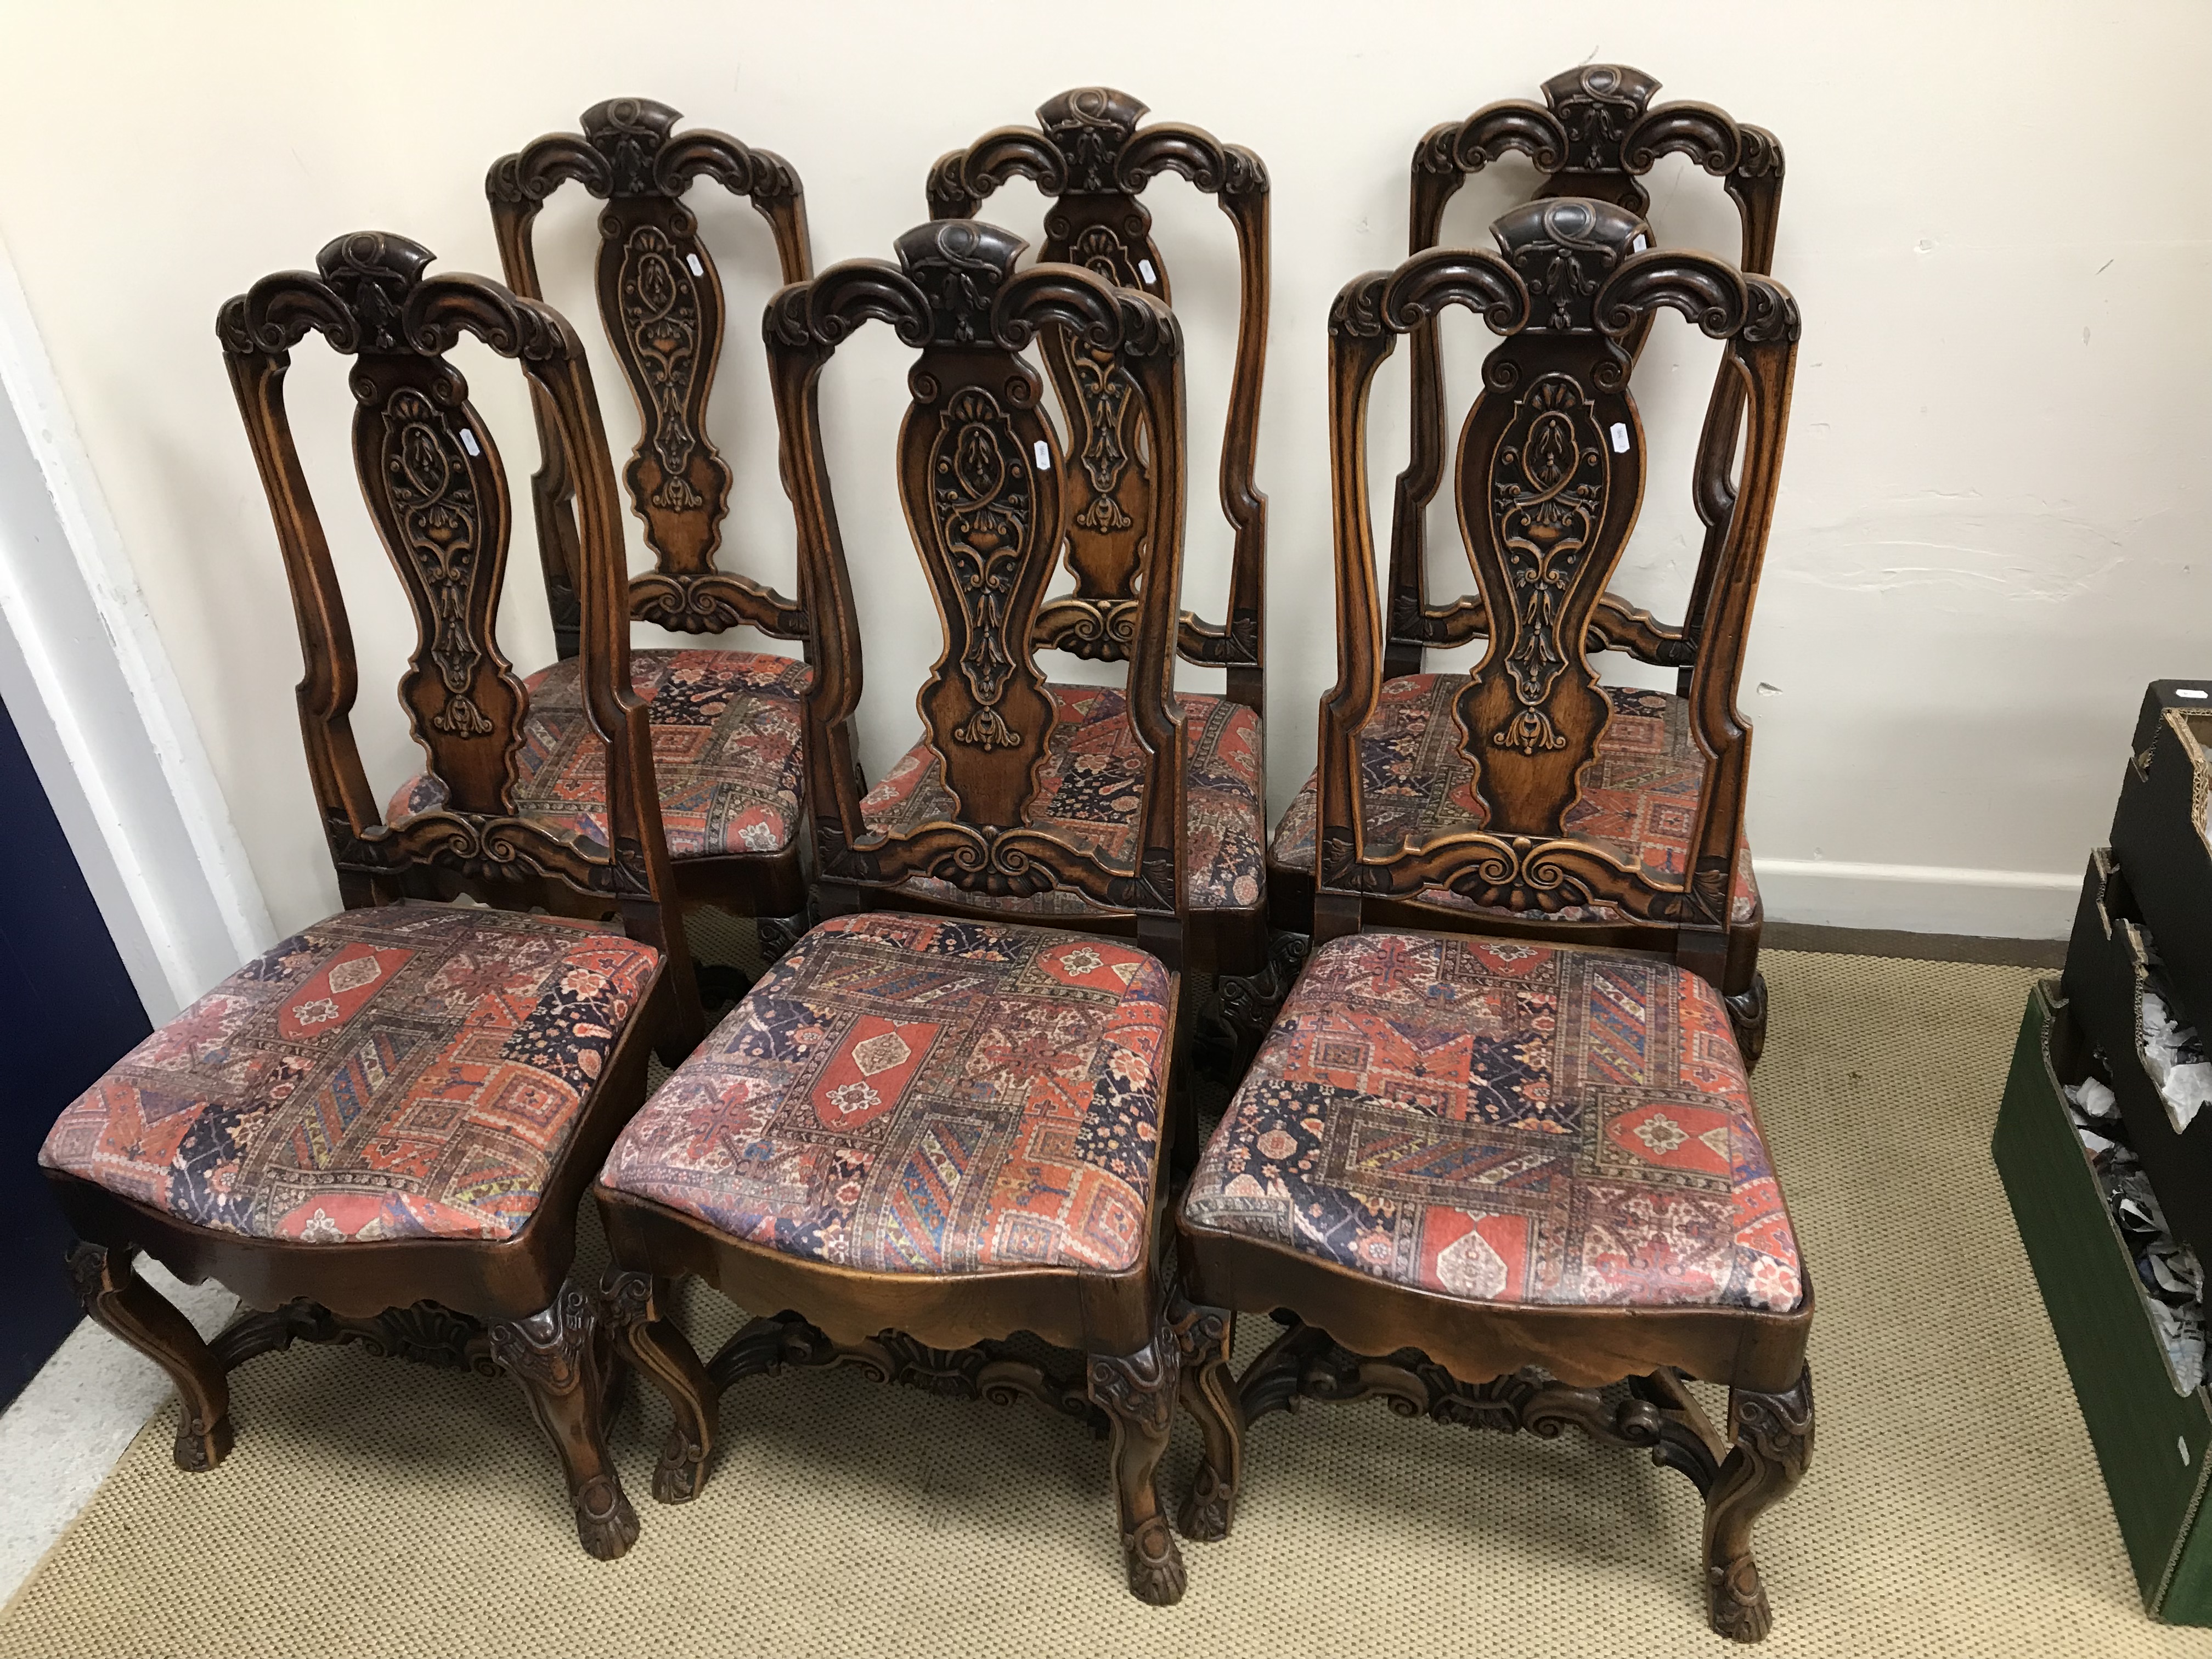 A set of six 19th Century Dutch walnut framed dining chairs in the 18th Century style of Daniel